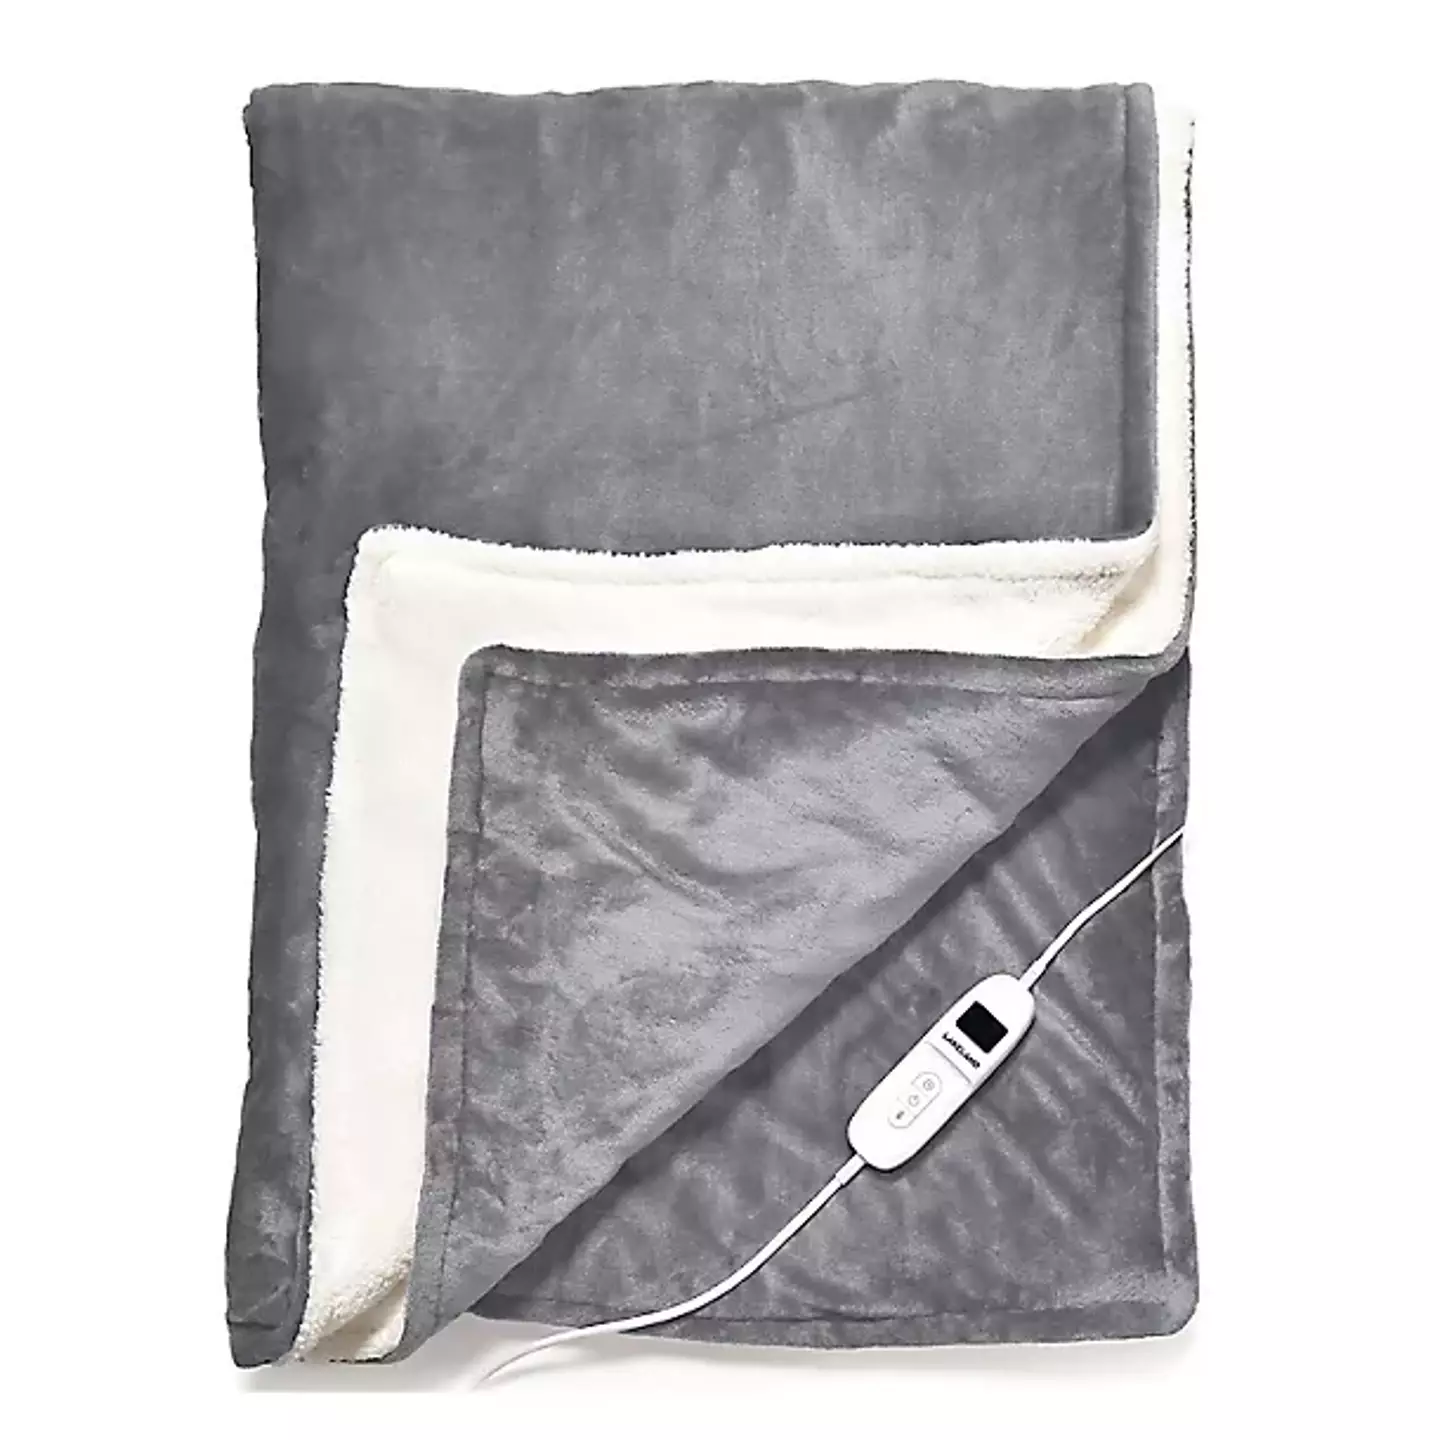 The heated throw will cost you as little as 2p an hour to run.